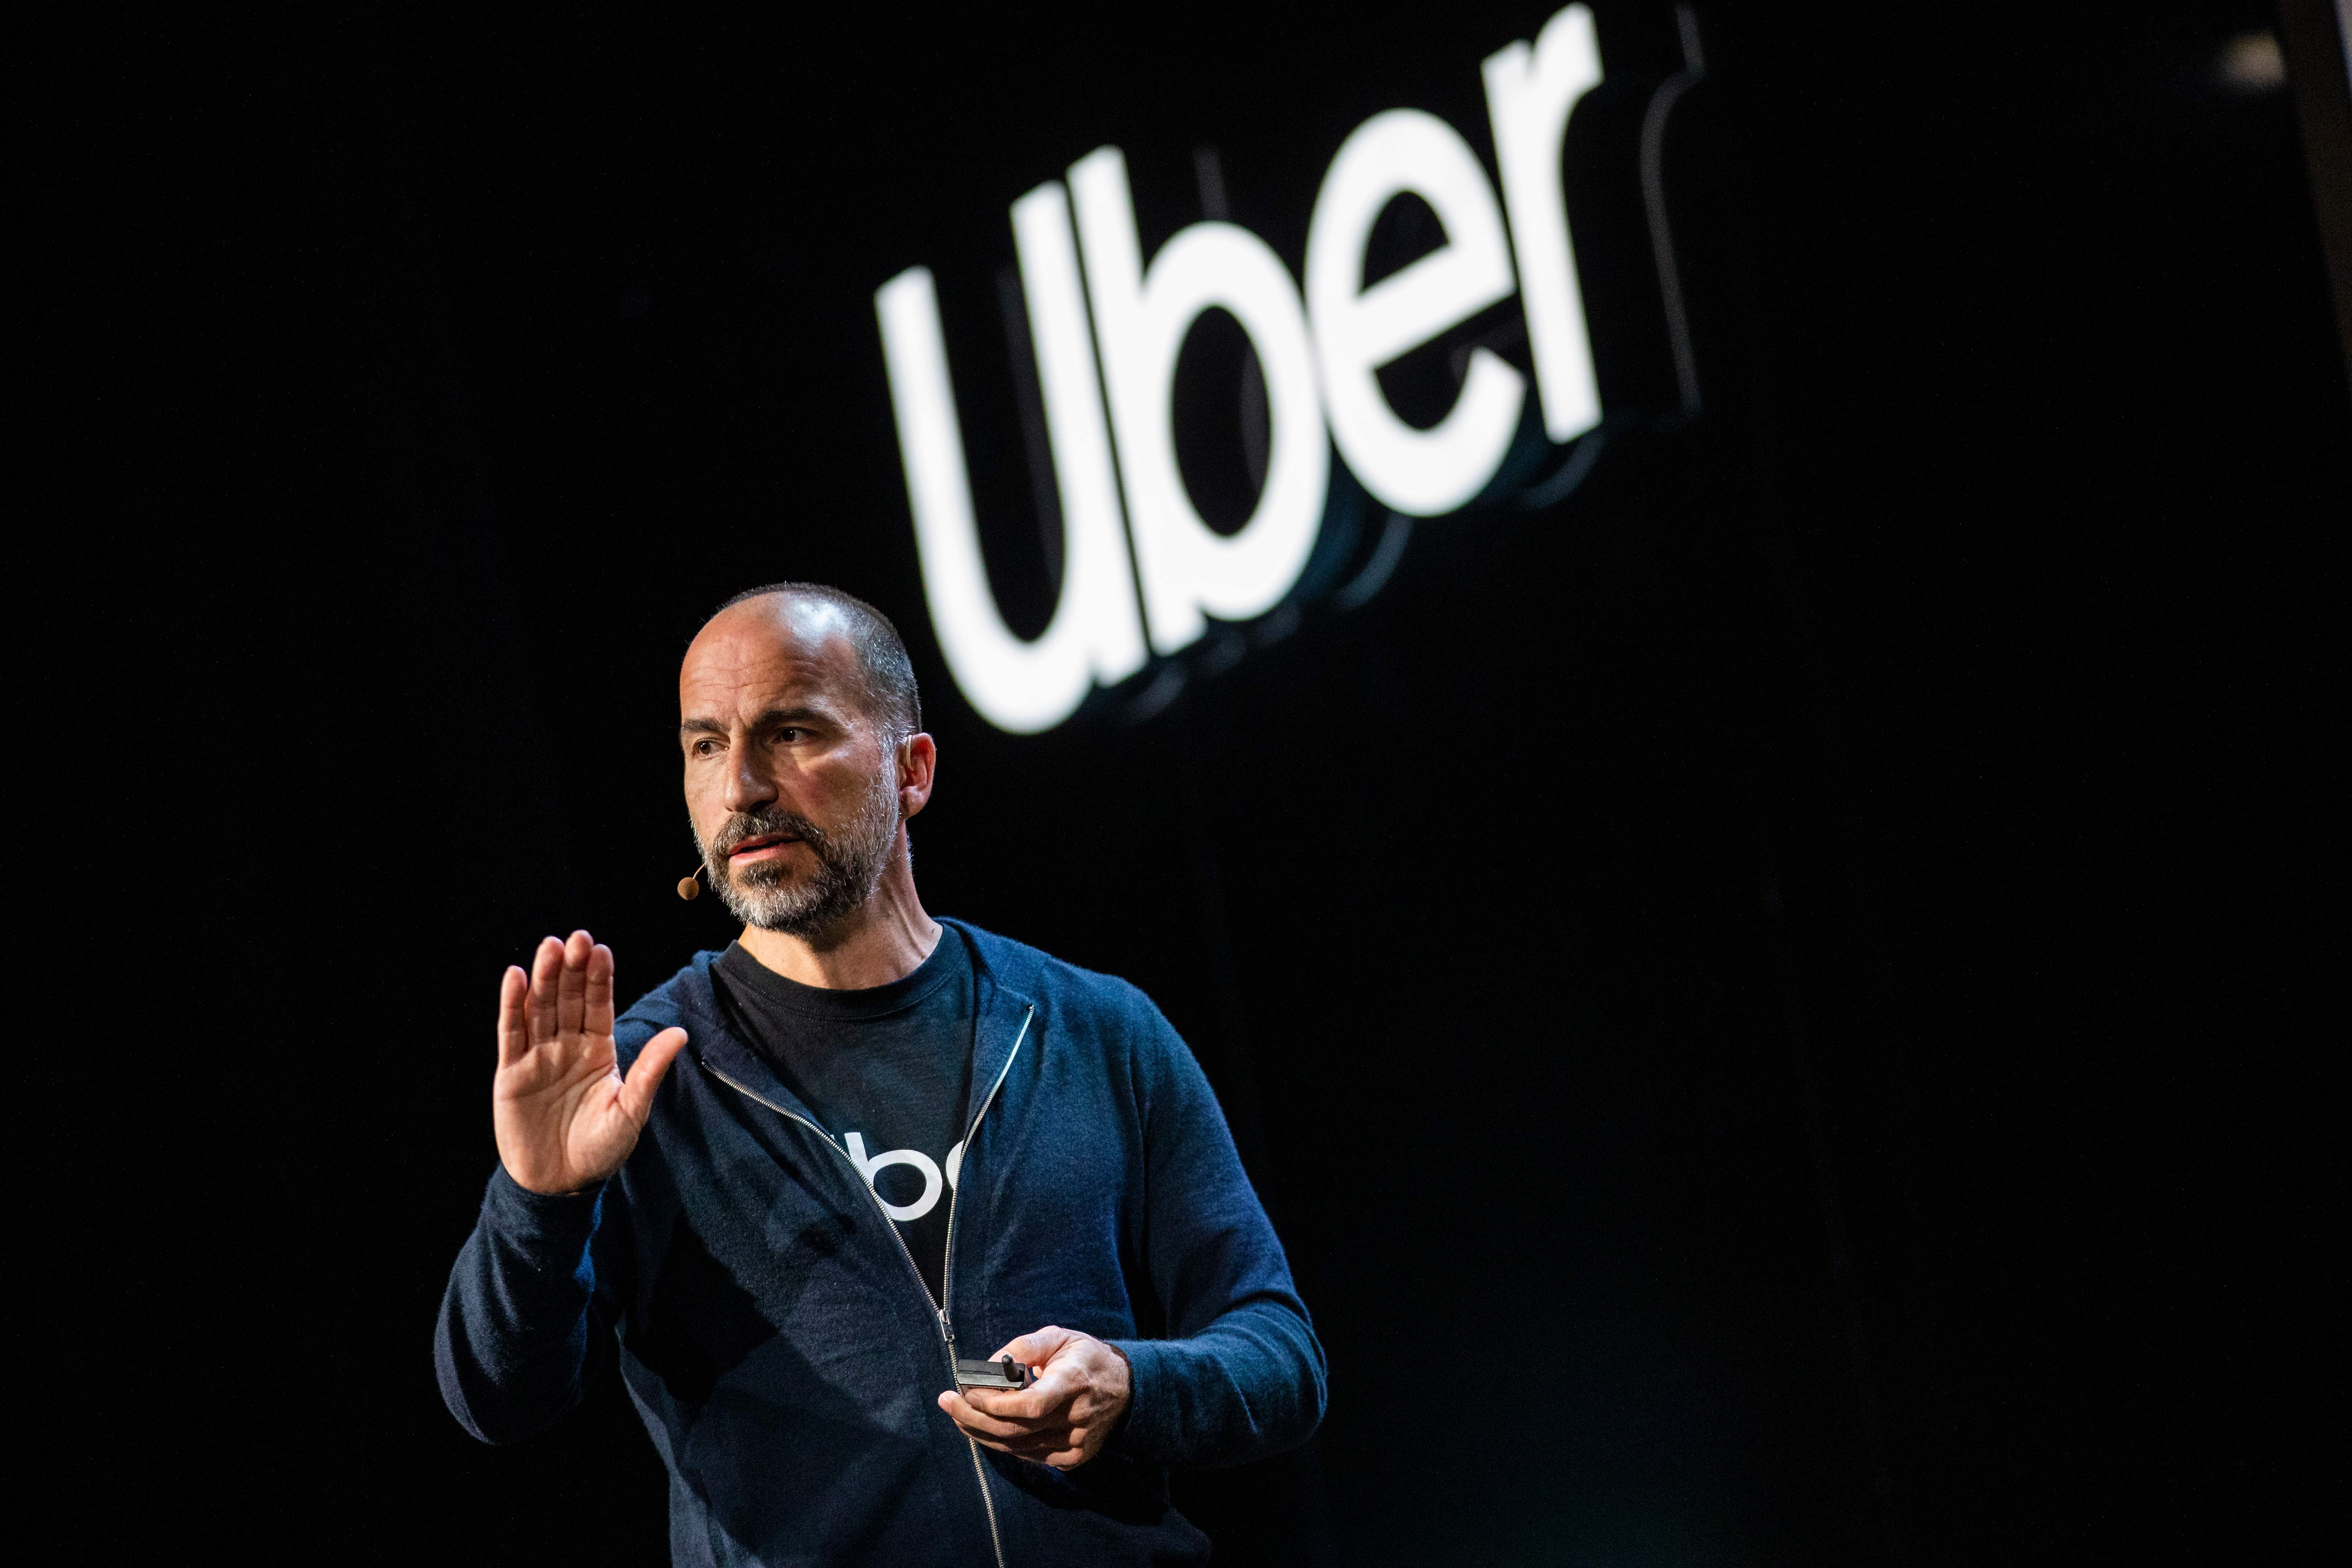 Uber is proposing California-style work reforms in Europe